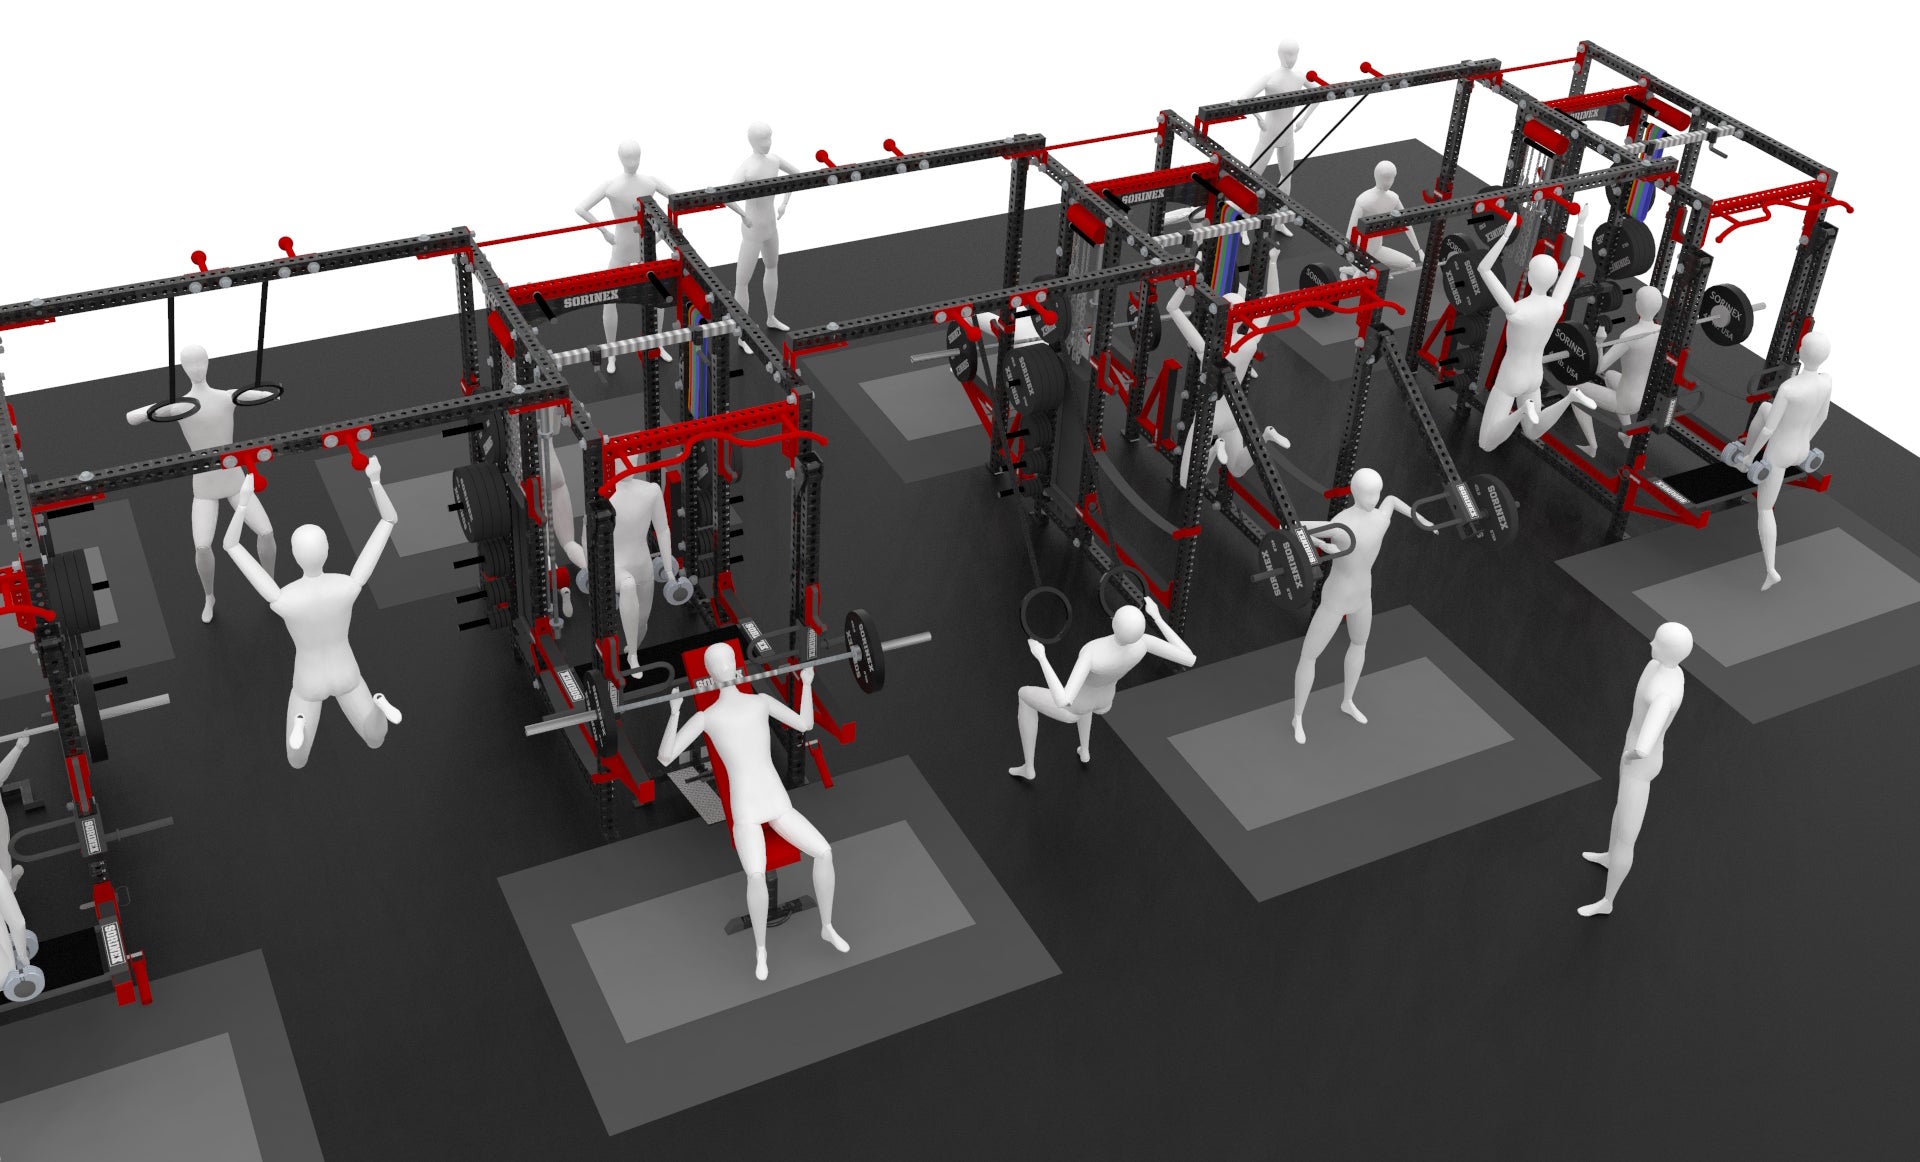 Sorinex weight rooms optimize your space to give you the most training space per square feet